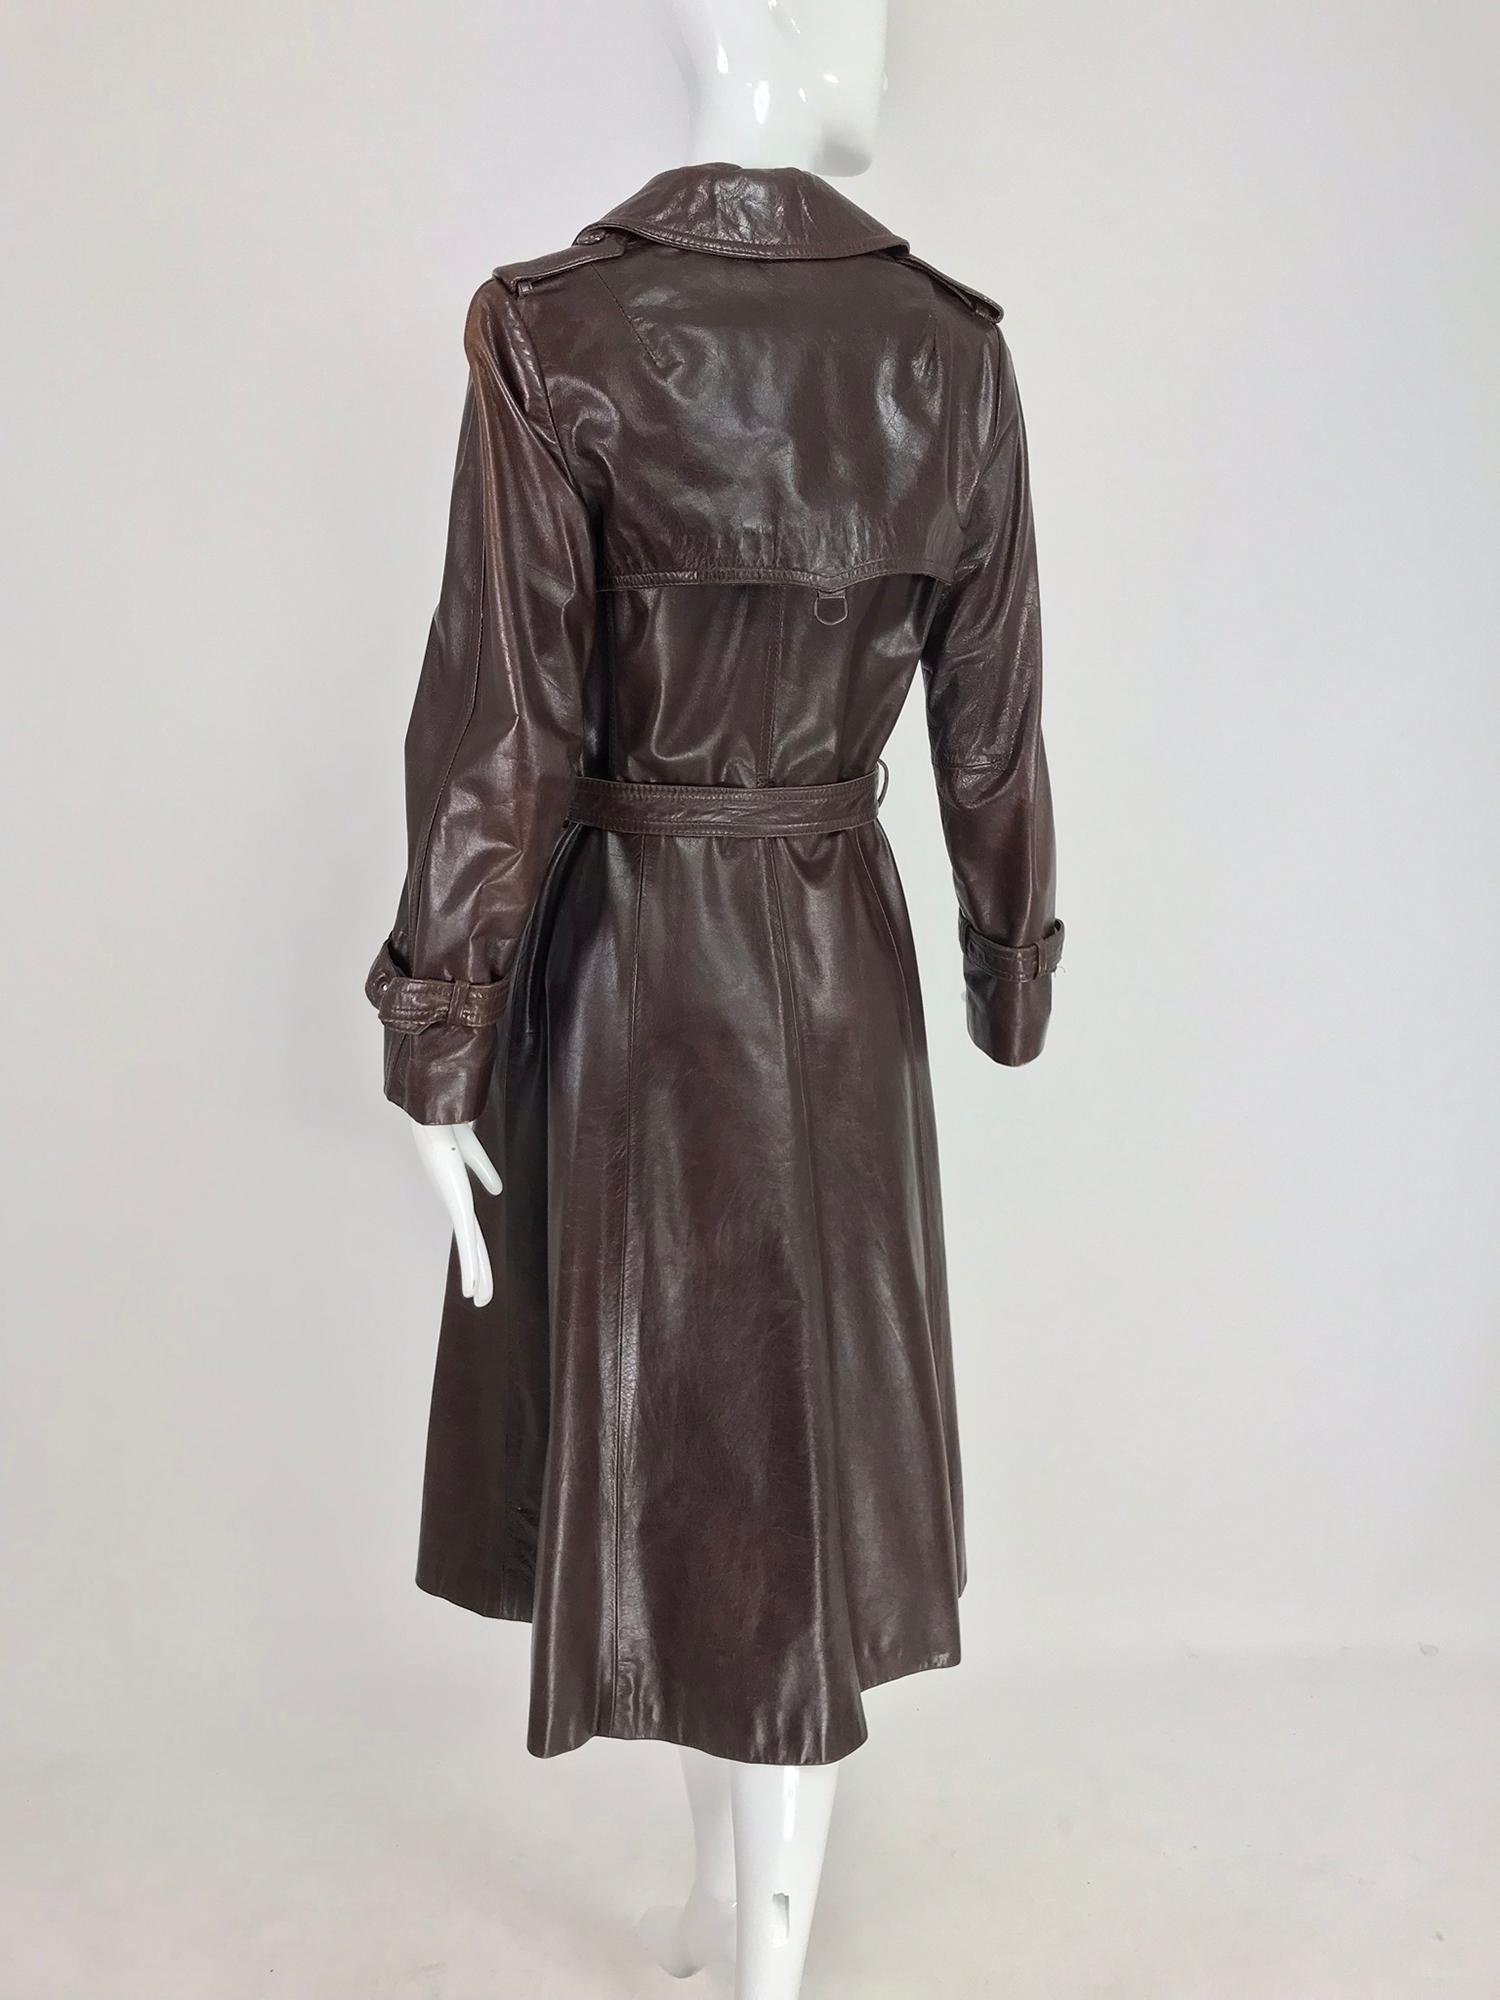 Women's Anne Klein Chocolate brown leather trench coat 1970s